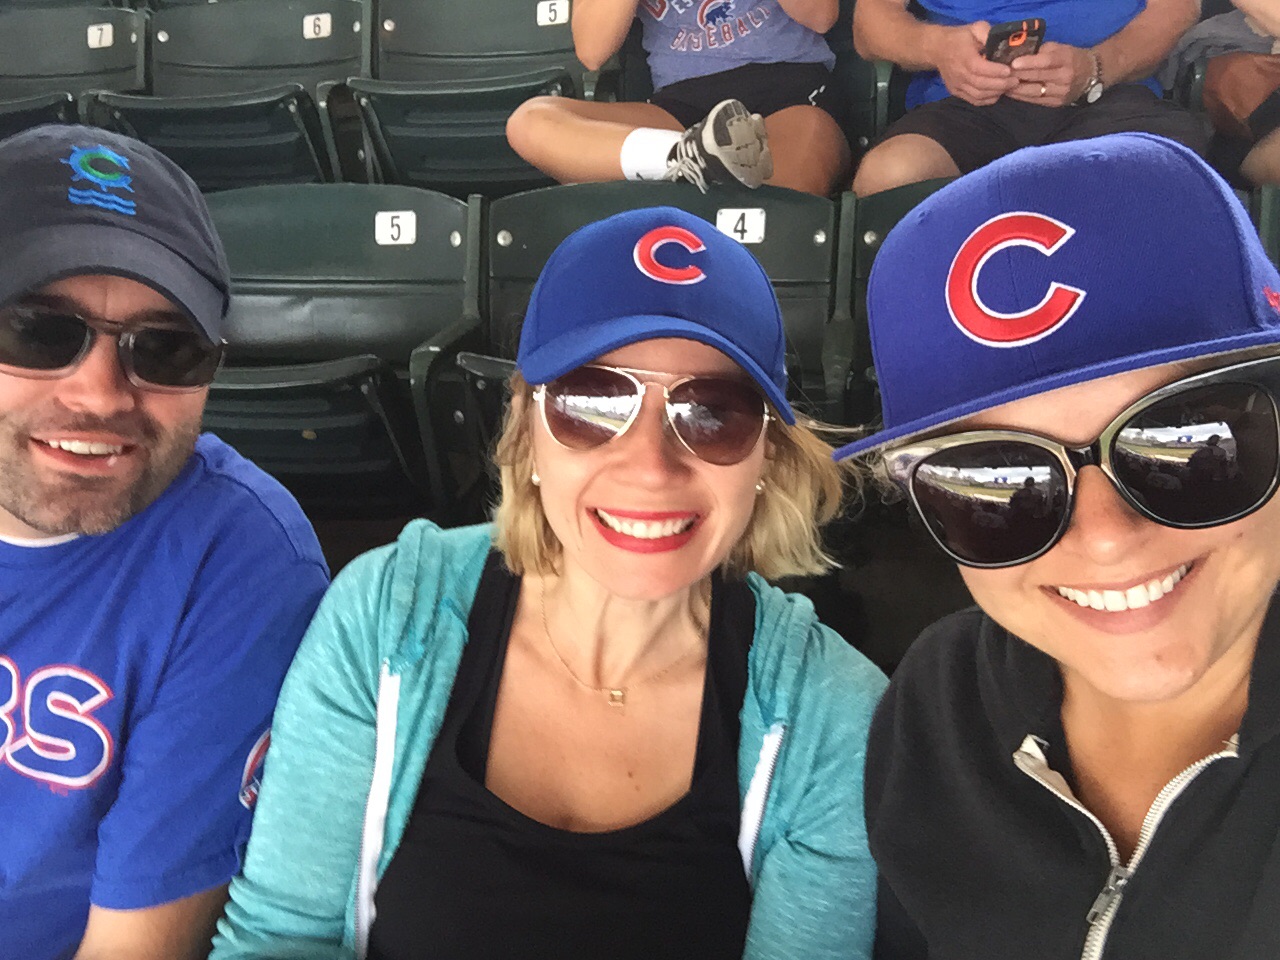 My Grandma's weekend pals  (Kevin, me, Vic) at Wrigley in 2016... the year the Cubs won the World Series!